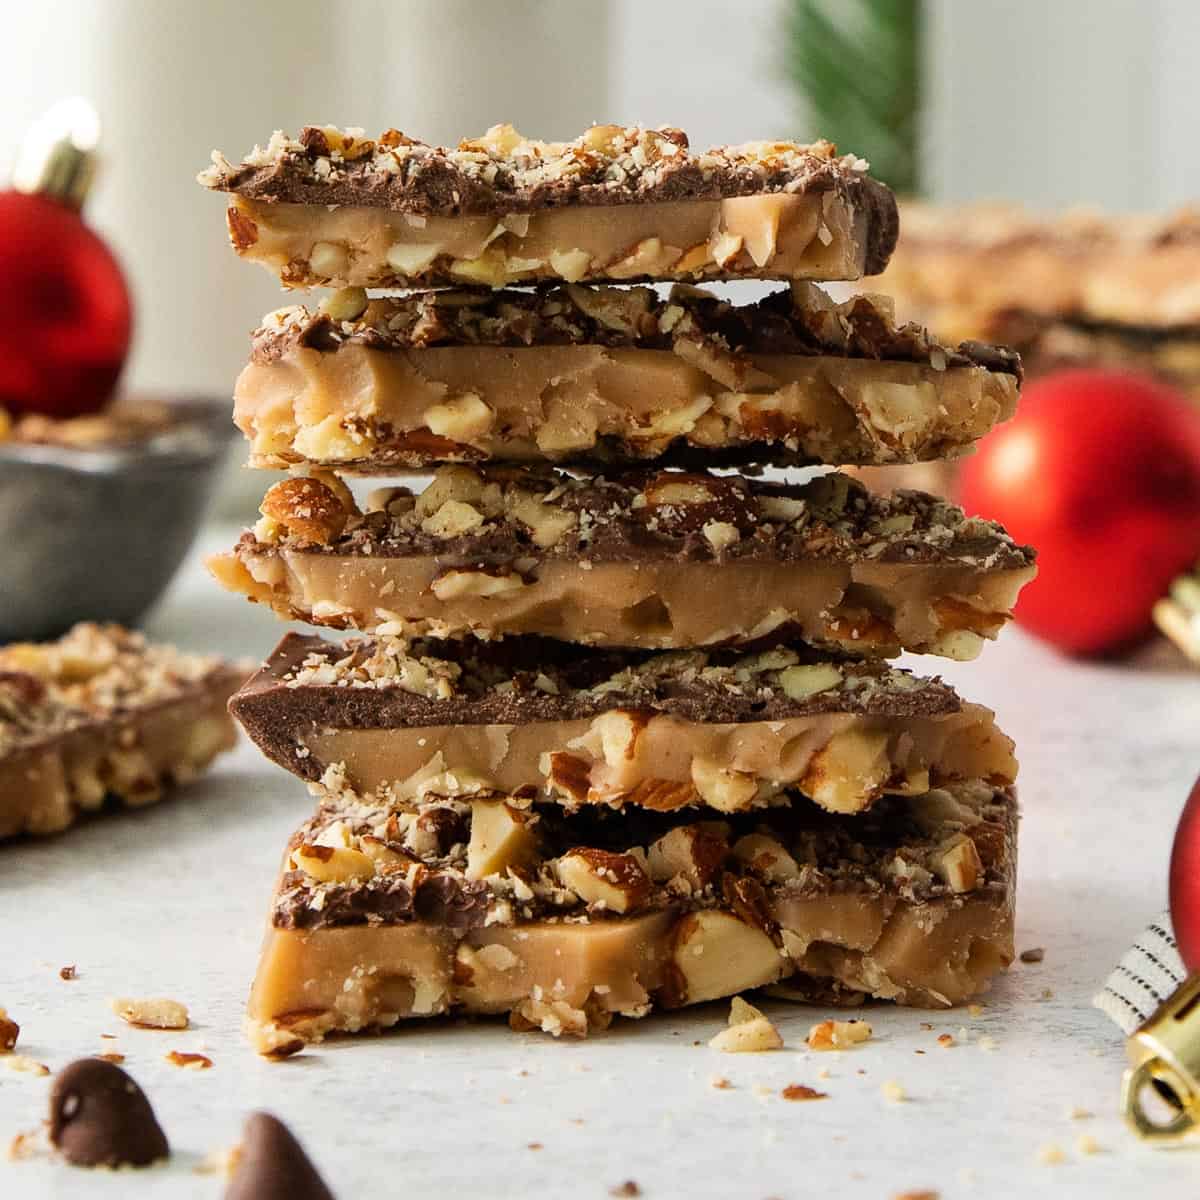 English toffee stacked on a countertop